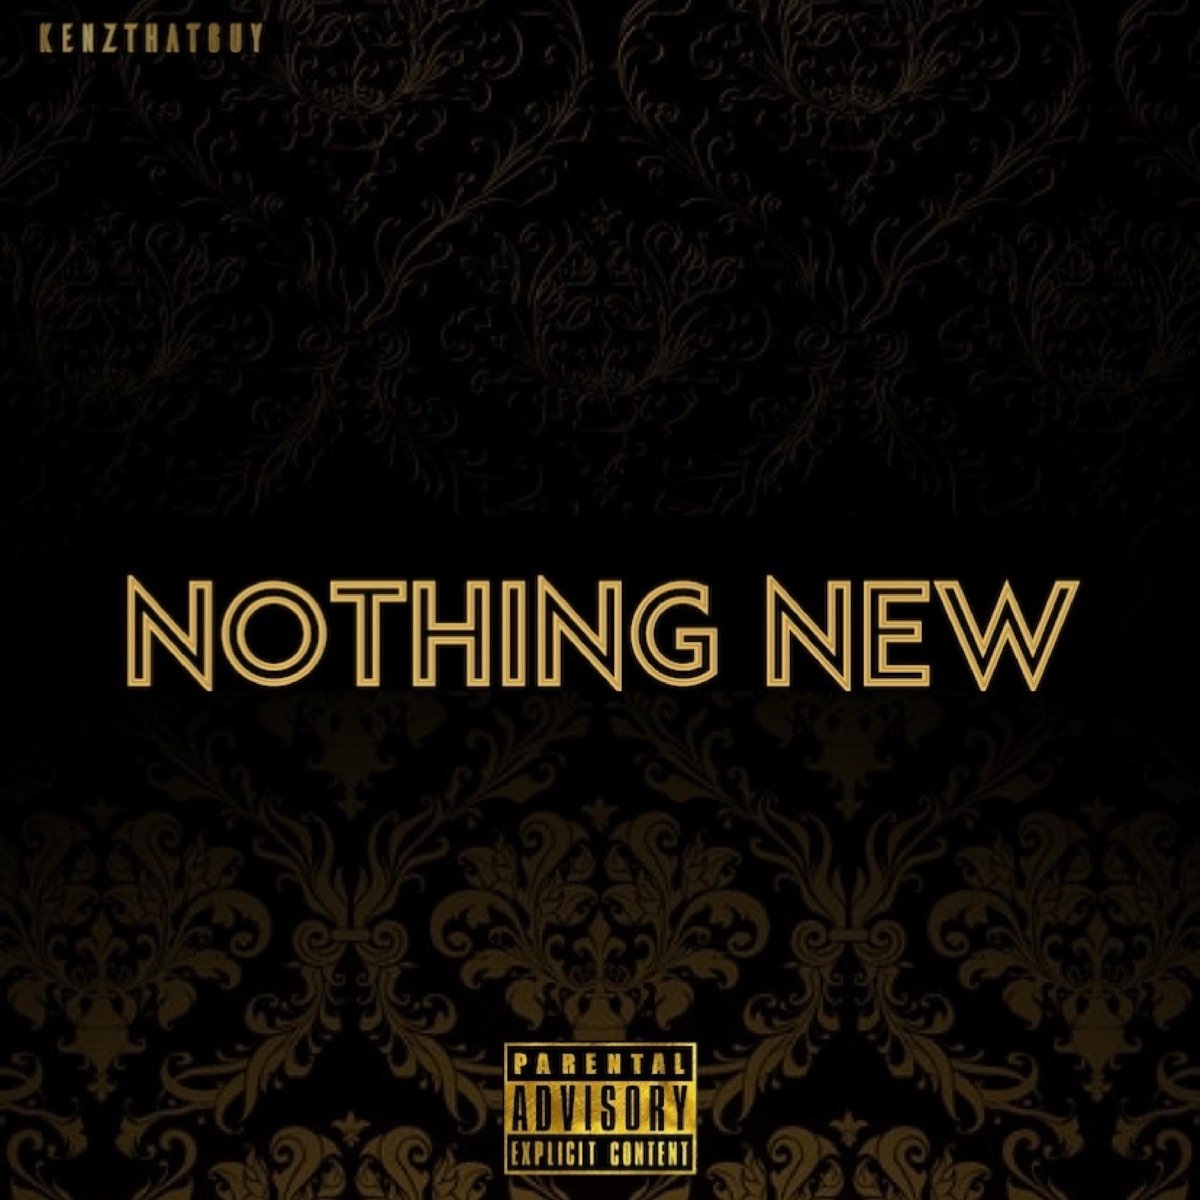 Nothings new текст. Nothing New. Nothing's New песня. Песня nothing's New nothing's New nothing's New nothing's New.